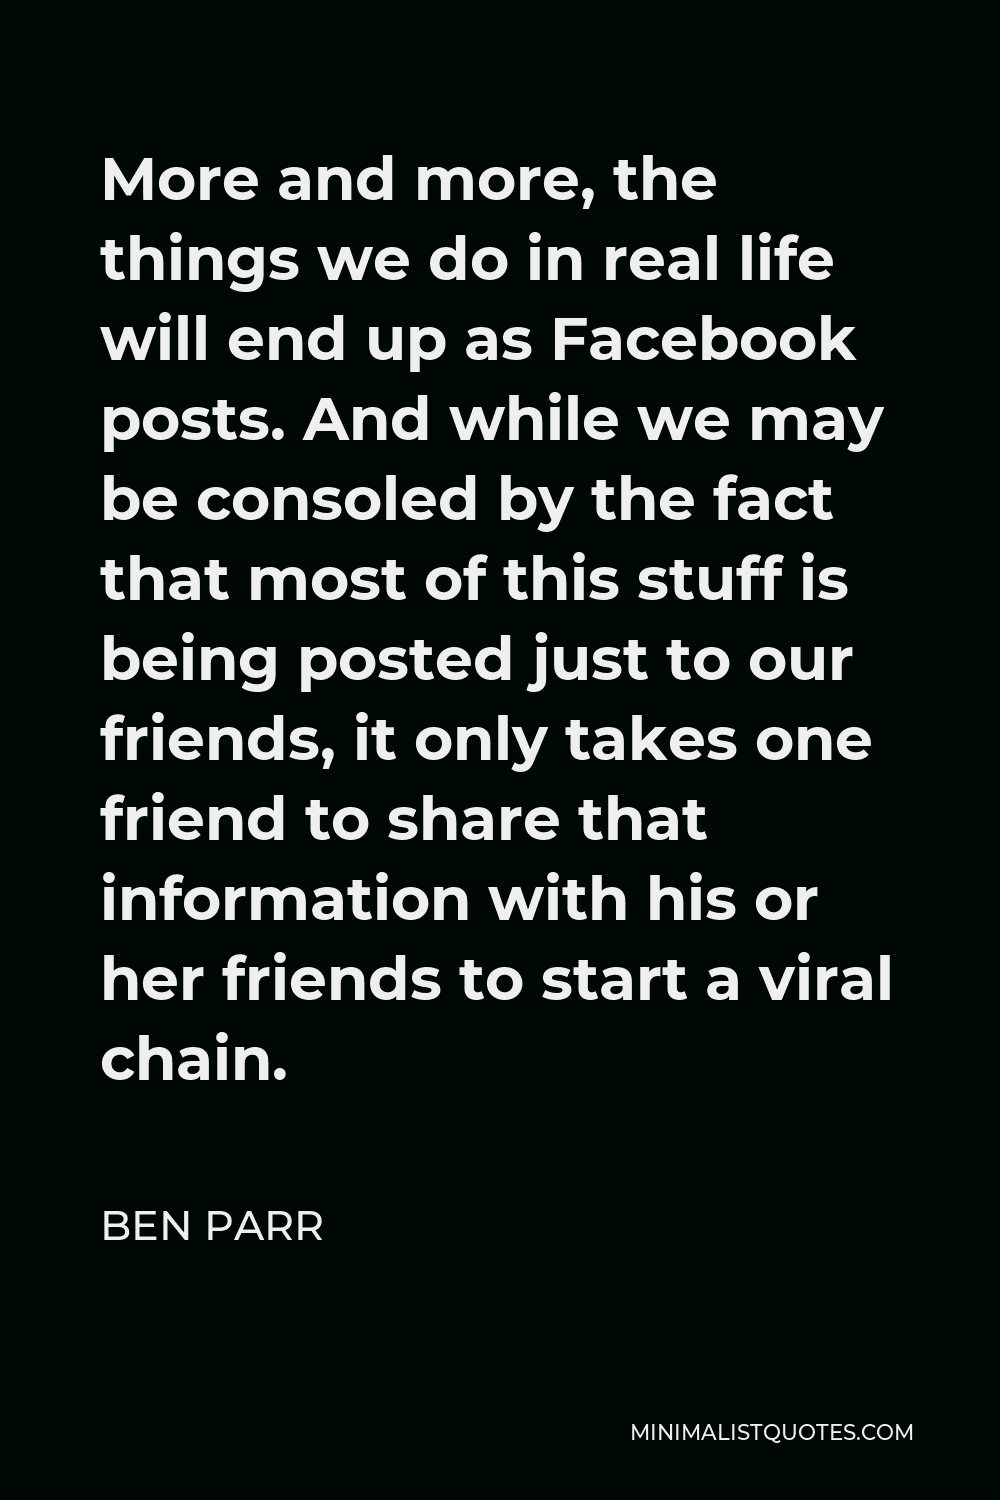 Ben Parr Quote - More and more, the things we do in real life will end up as Facebook posts. And while we may be consoled by the fact that most of this stuff is being posted just to our friends, it only takes one friend to share that information with his or her friends to start a viral chain.